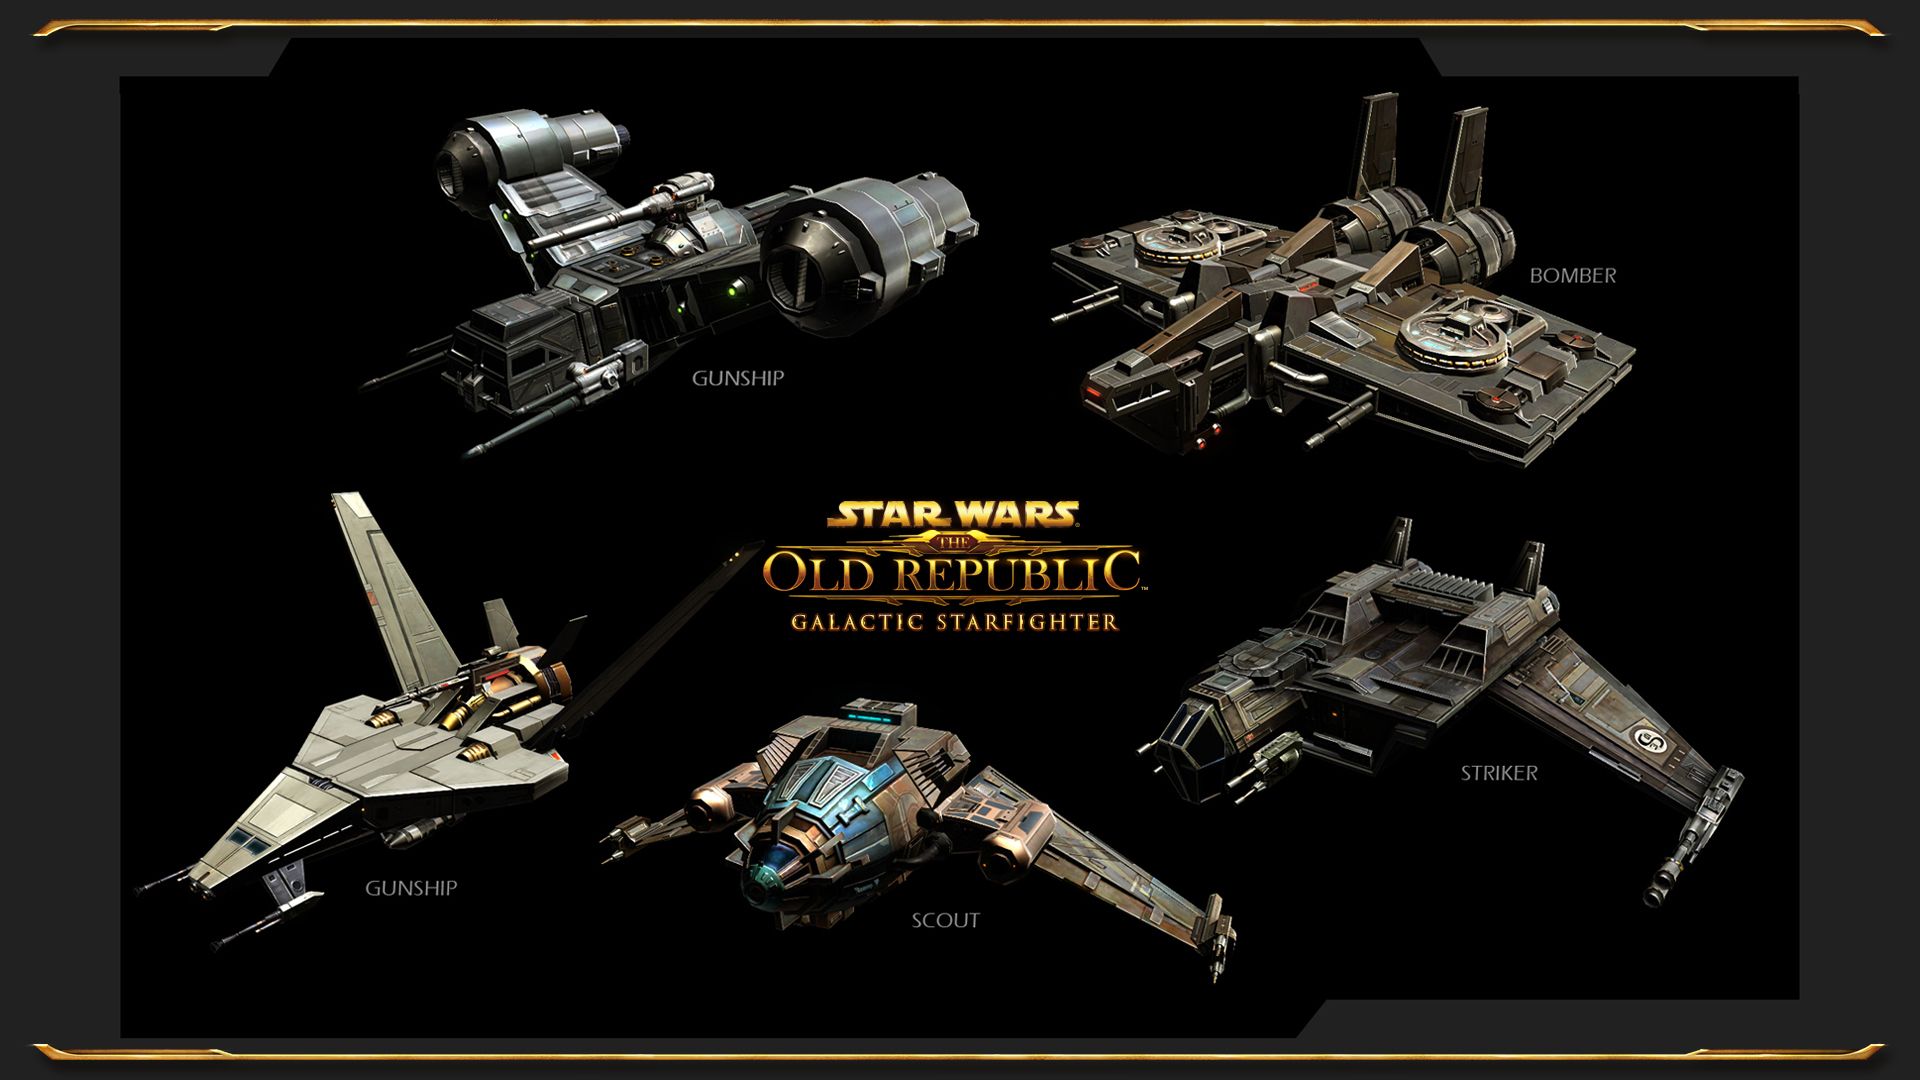 Galactic Starfighter. Star Wars: The Old Republic. Star wars the old, Star wars awesome, Star wars ships